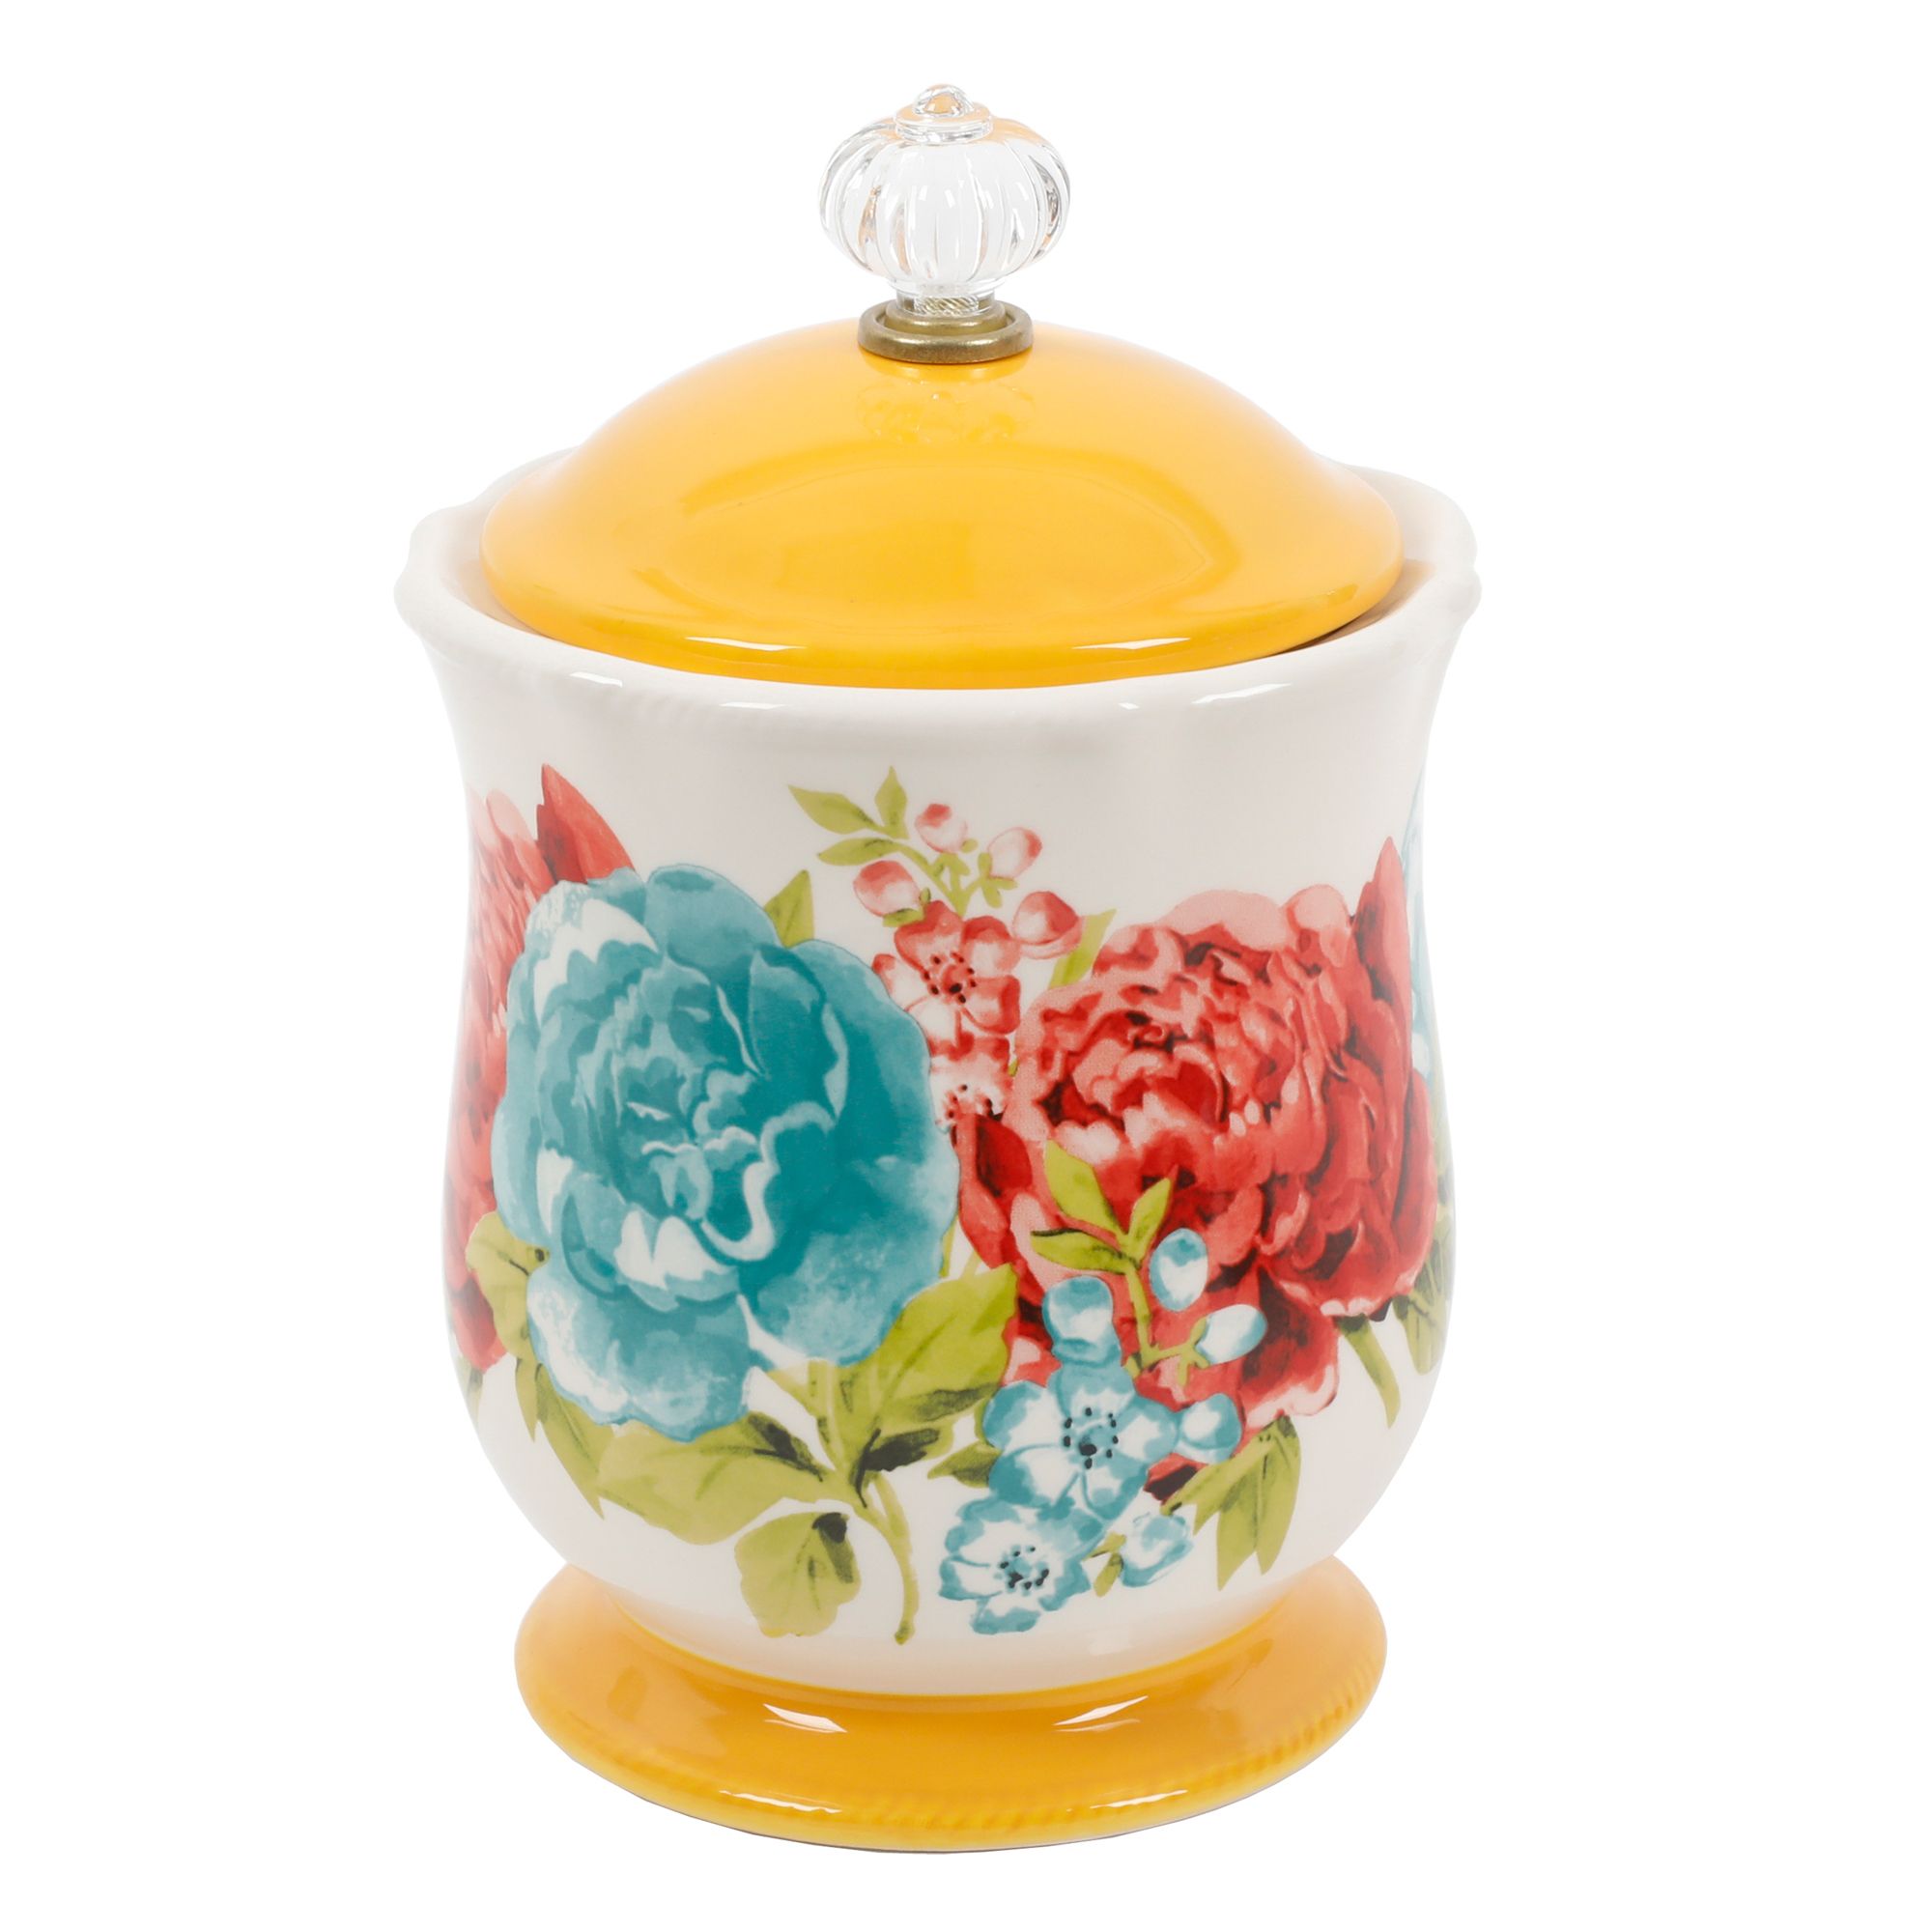 The Pioneer Woman Blossom Canister